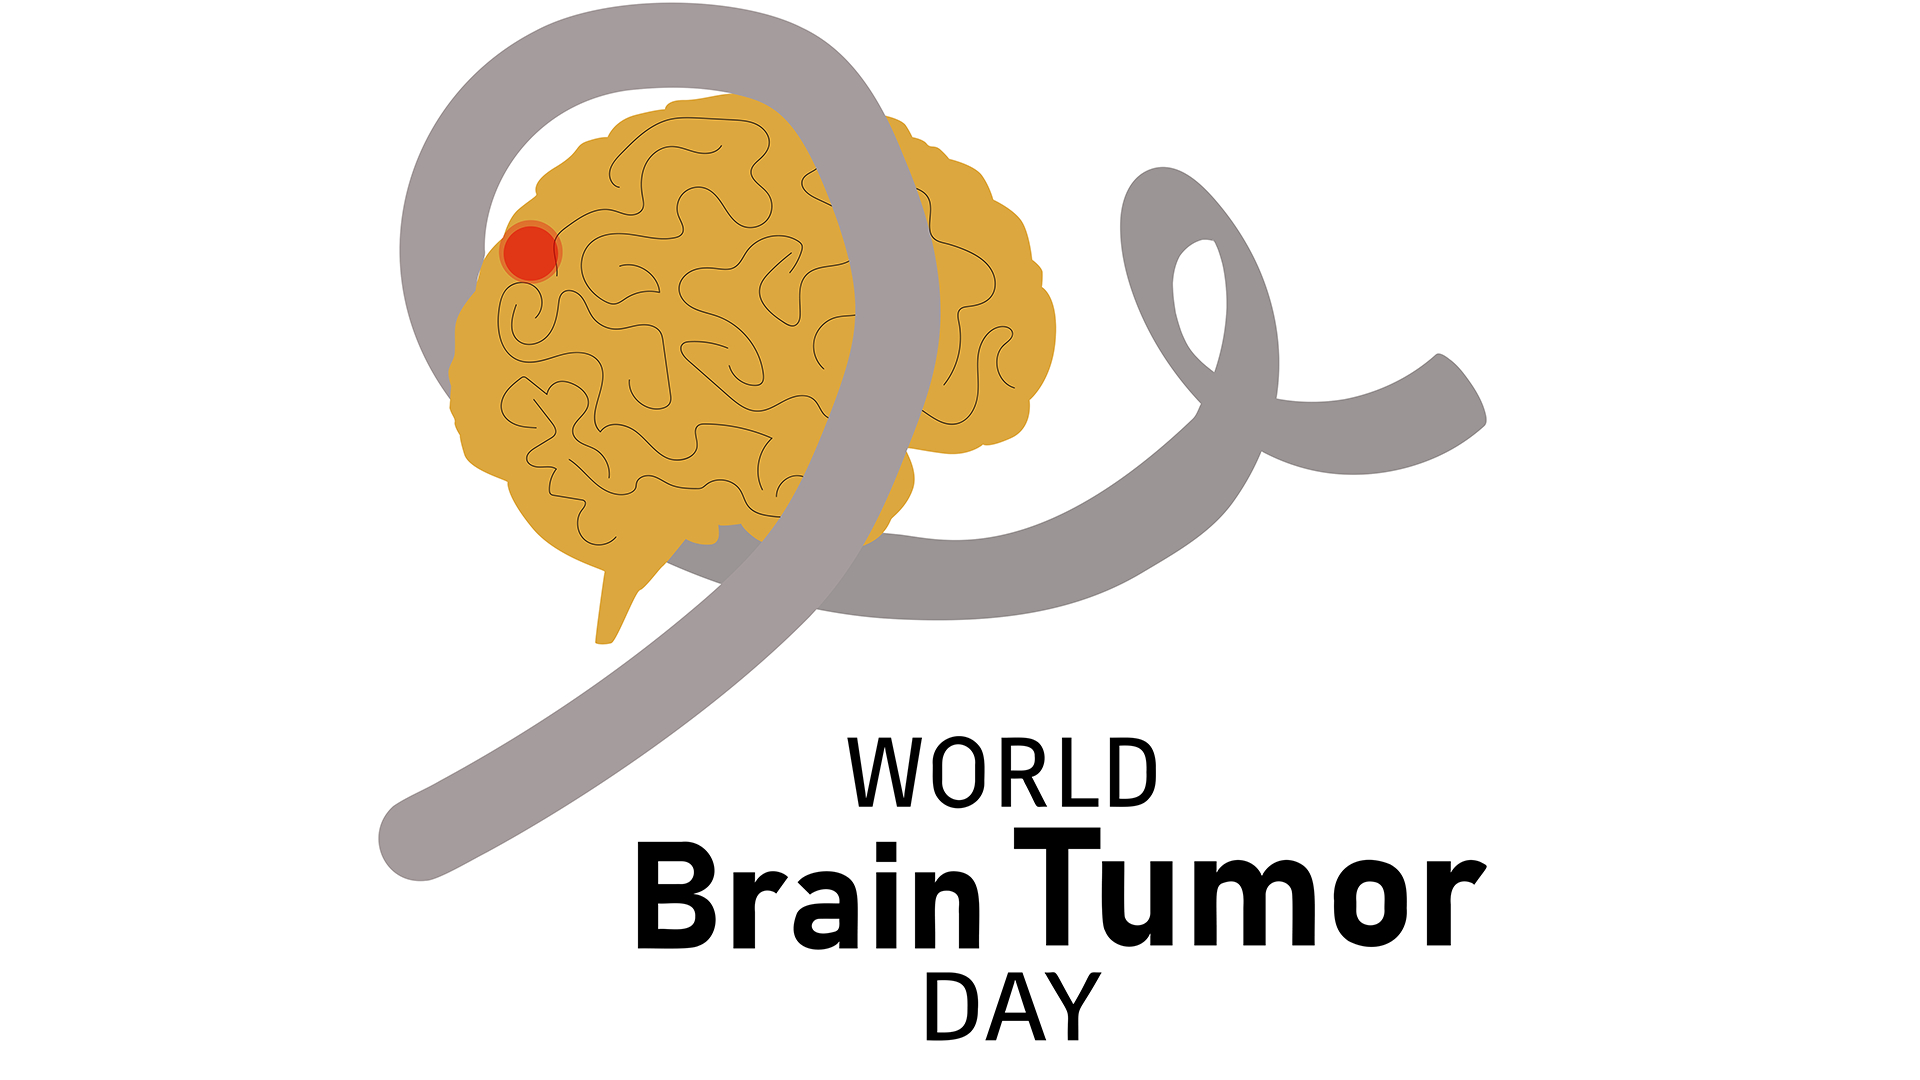 Tumor Day, research and treatment